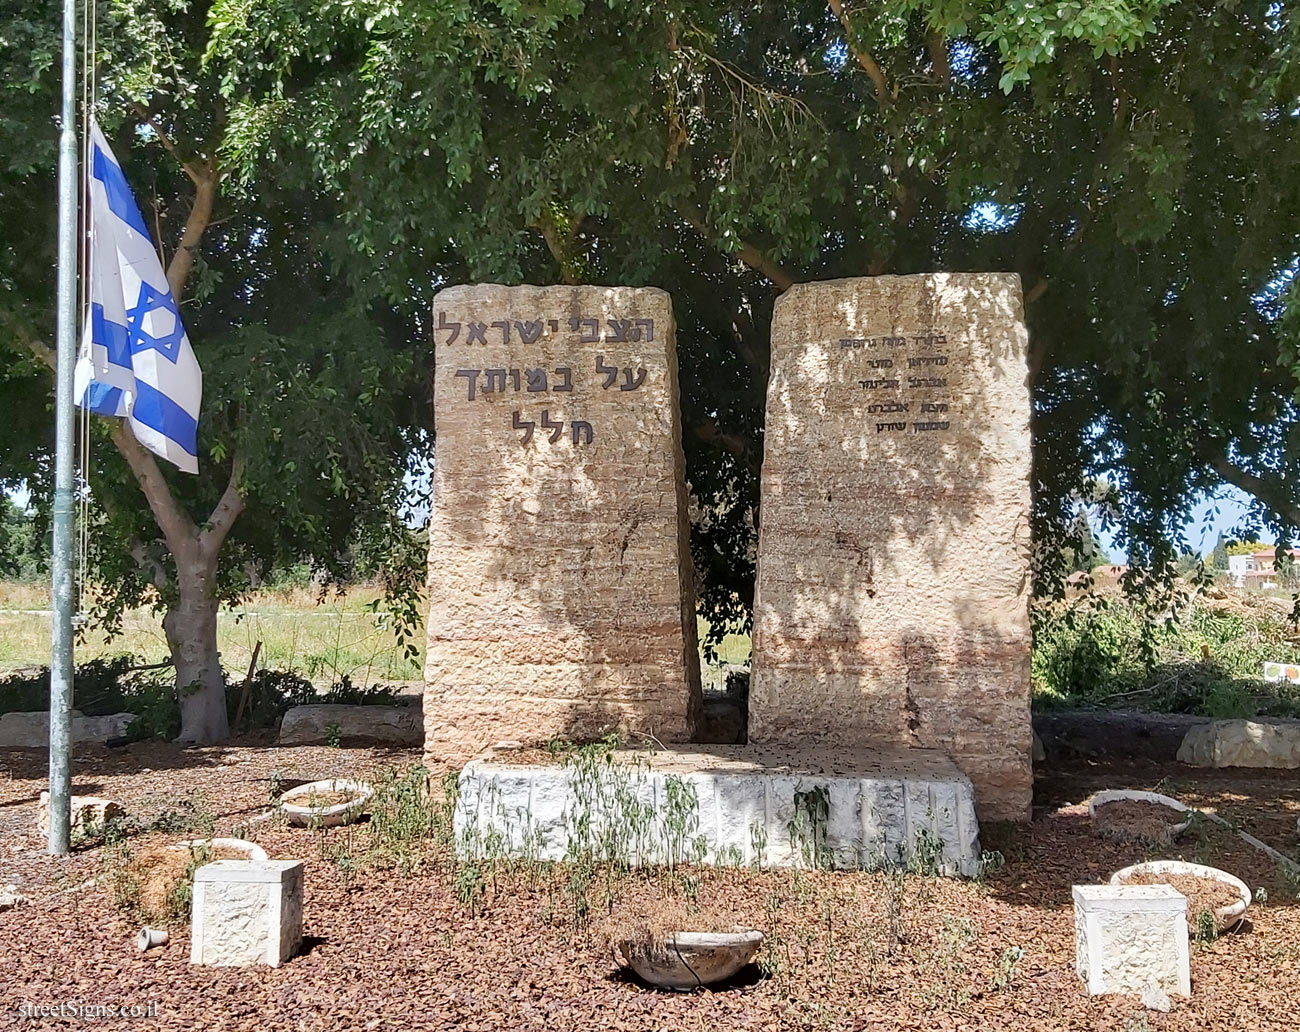 Emunim - a memorial to the members of the moshav who fell in the Israeli wars